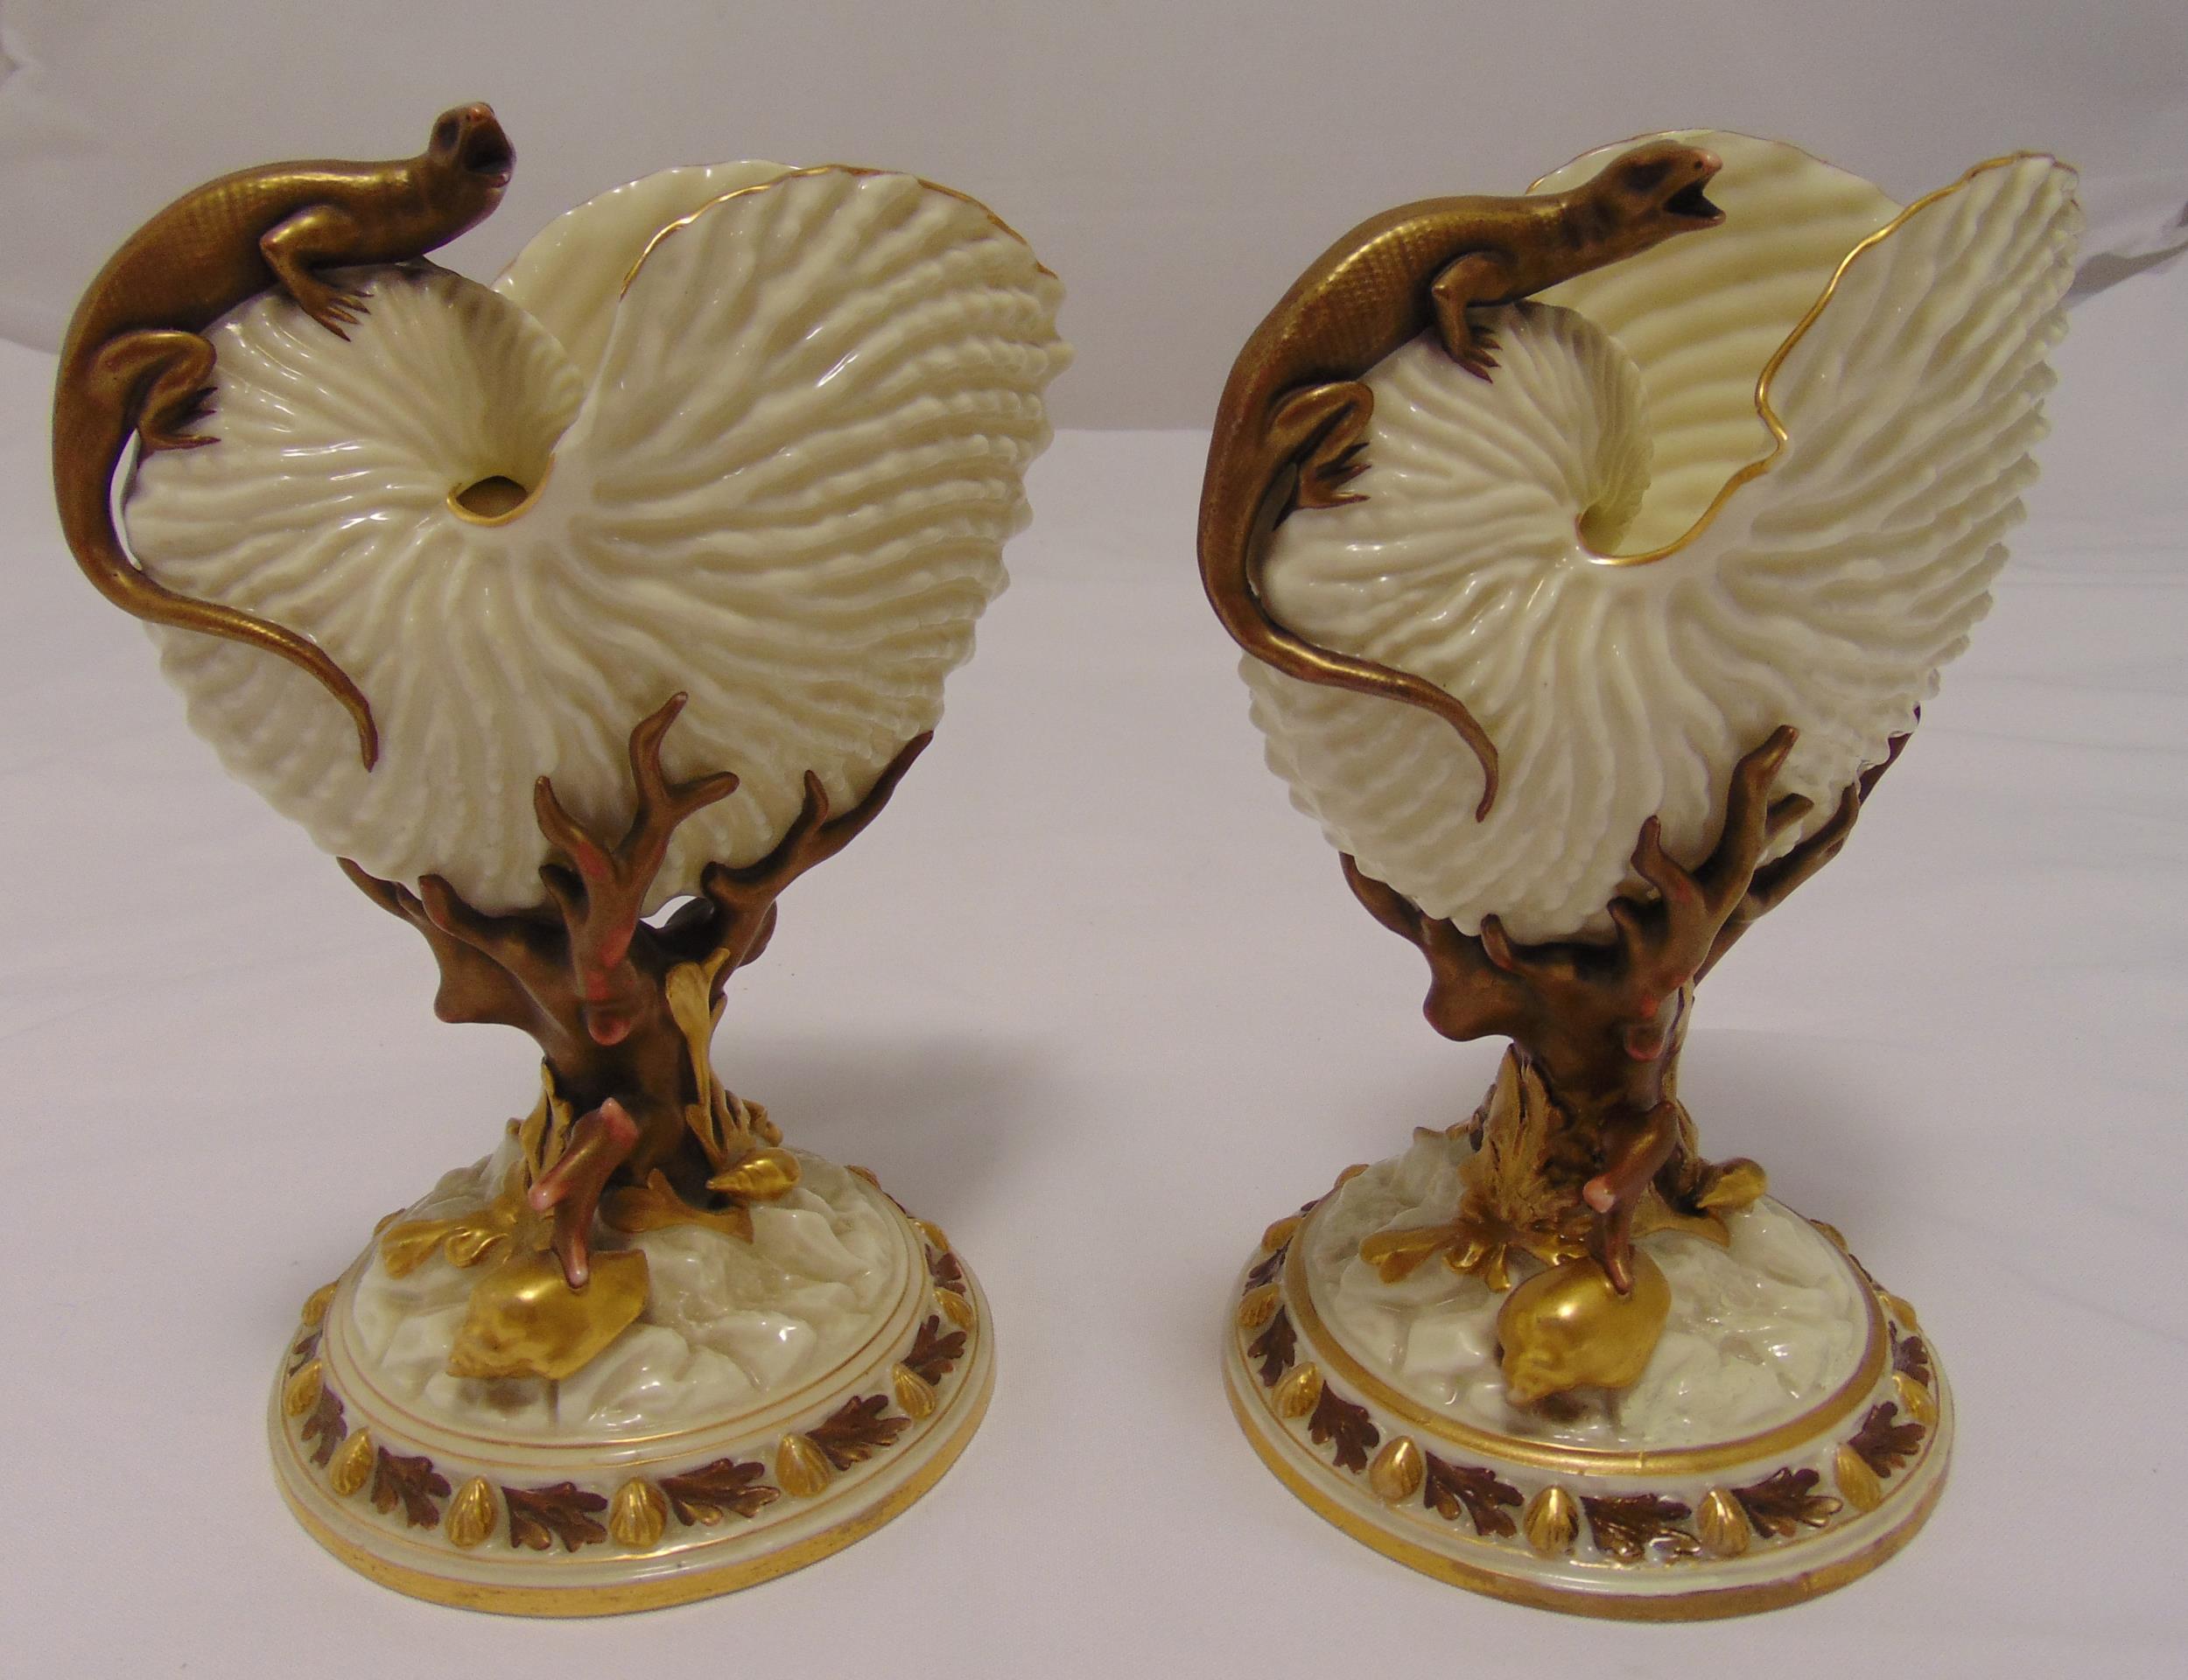 A pair of Royal Worcester Nautilus shell vases with applied lizards and coral supports on raised